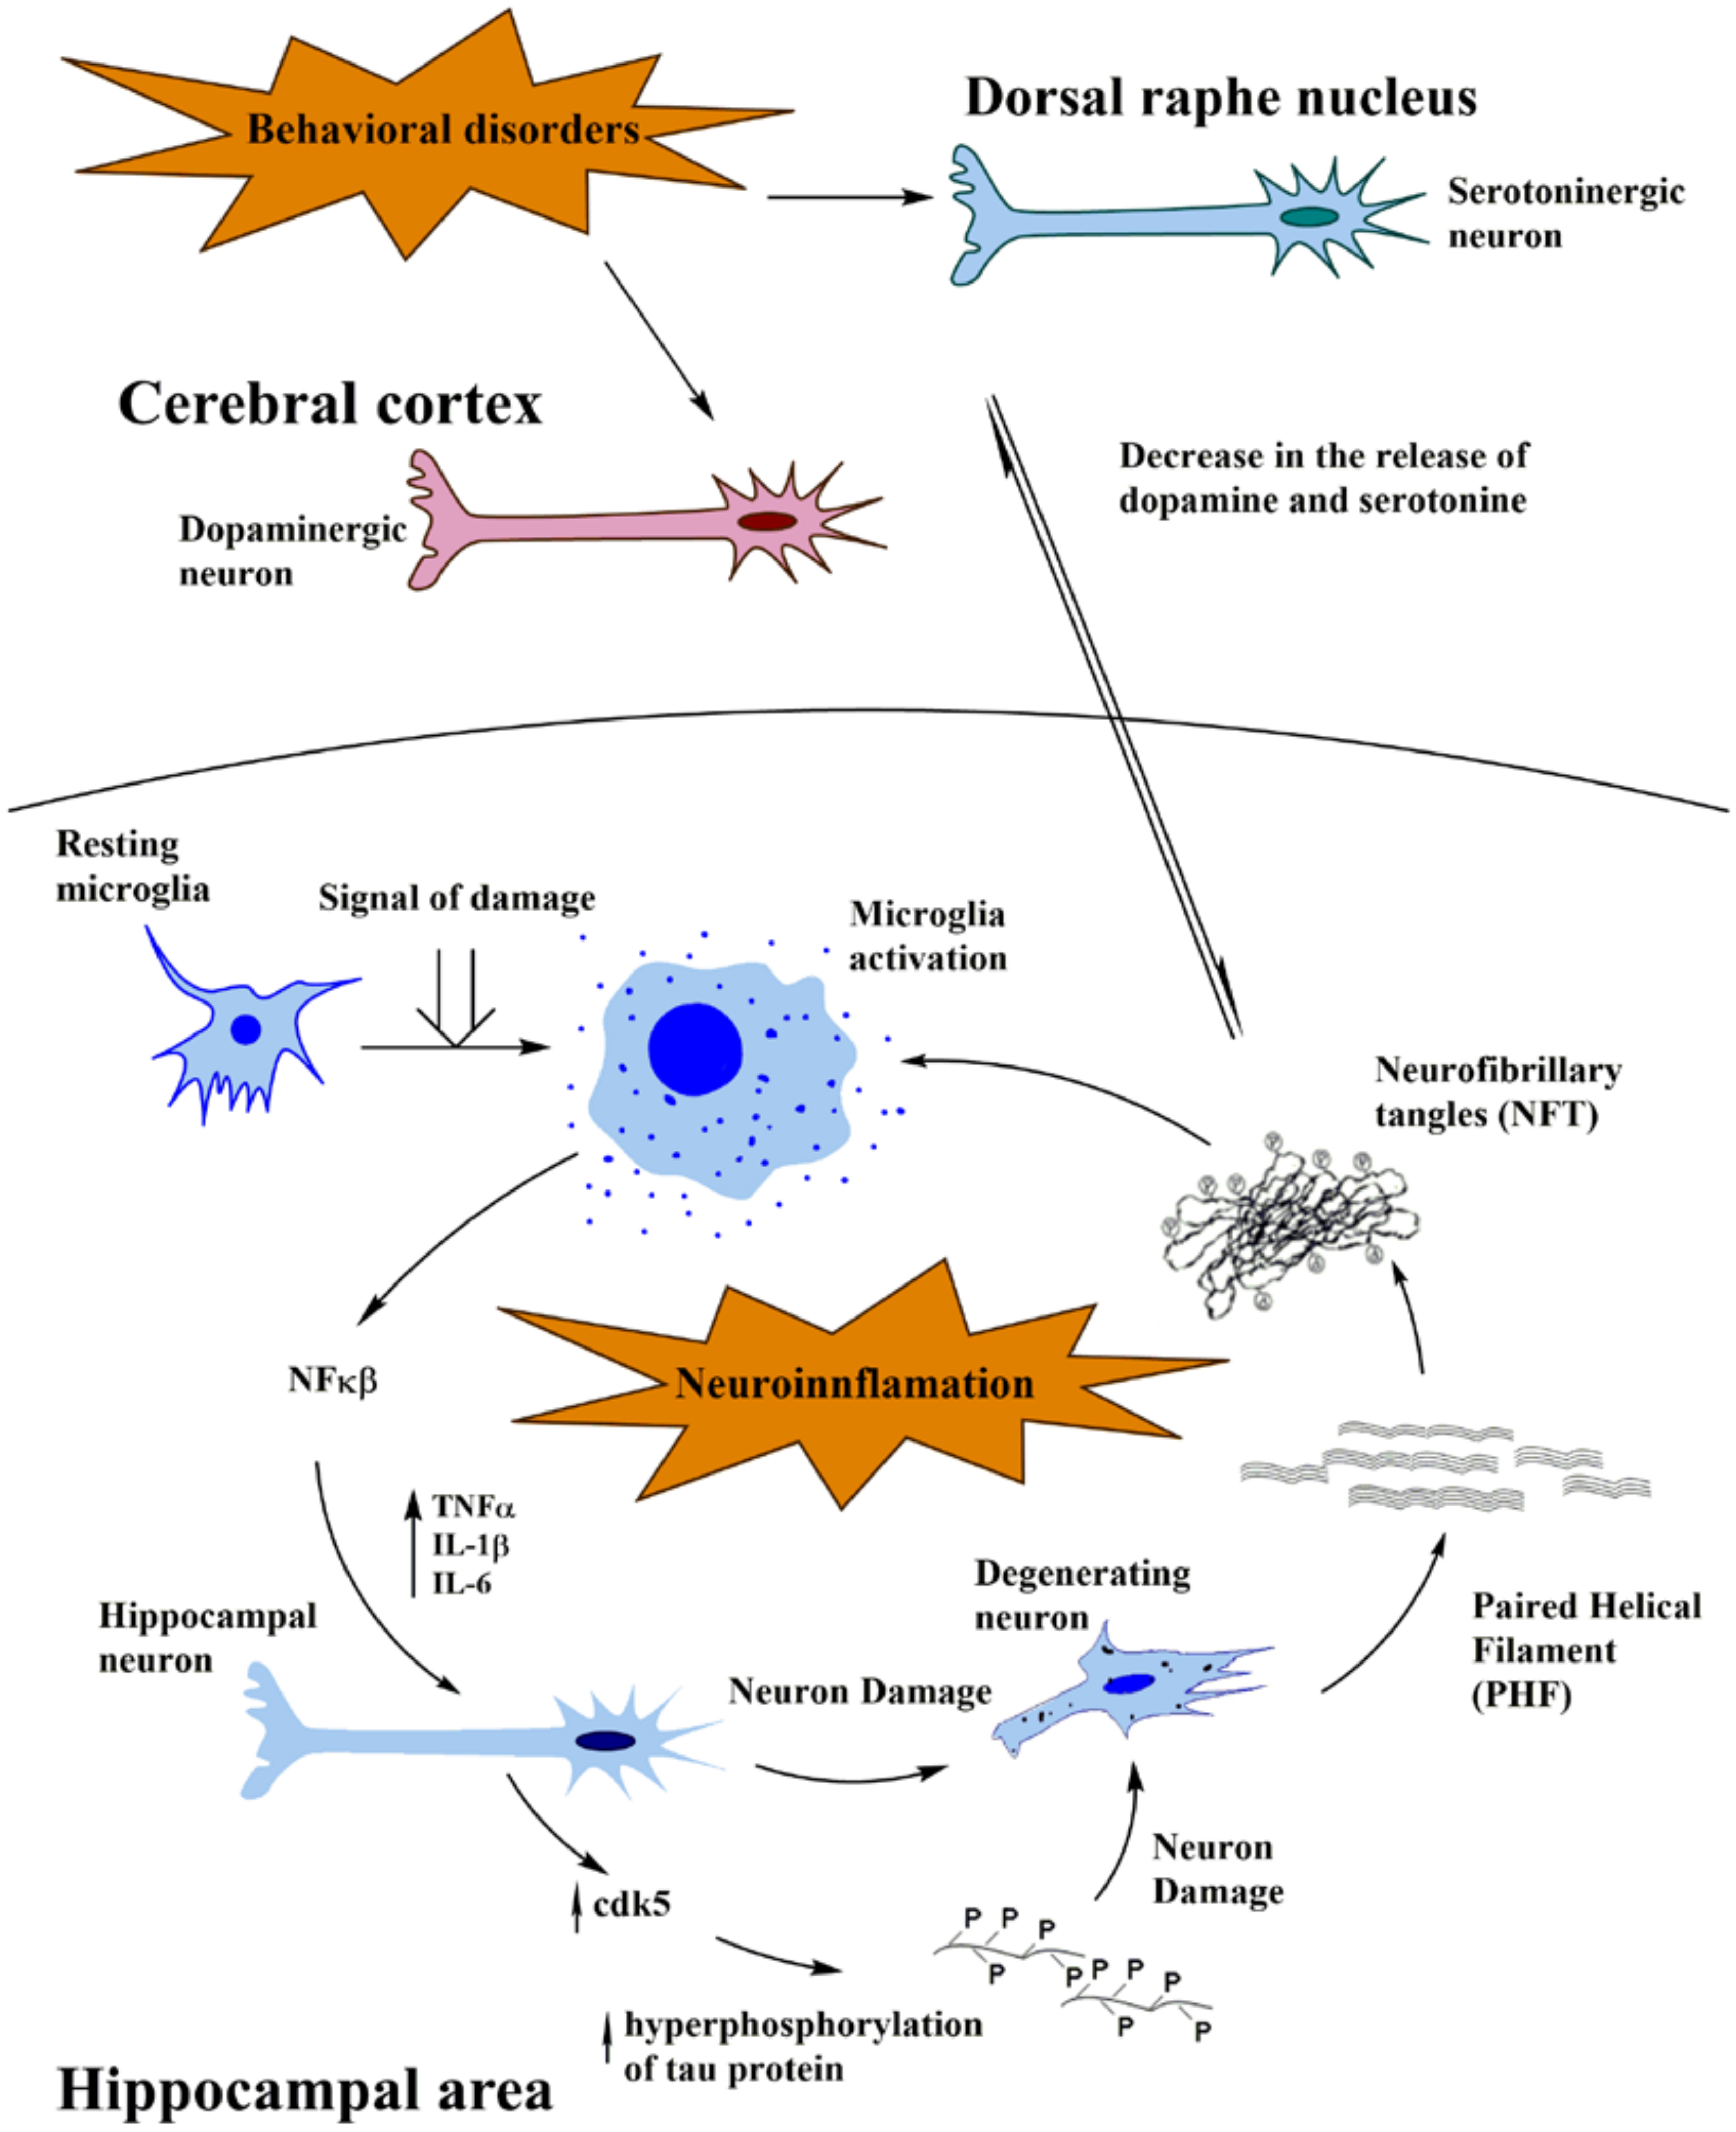 Figure 1 Schematic representation of concerted action of dopaminergic/serotonergic decrease-neuroinflammation hypothesis on Alzheimer´s pathogenesis. Molecular and cellular events occurring at the dopaminergic area and dorsal raphe nucleus, linked with behavioral and mood alterations results in dopamine/serotonergic reduction. This event appears to activate the neuroinflammatory cascade at the hippocampal level, by stimulating microglial cells and as a consequence, promoting the release of pro-inflammatory factors that in turn activate protein kinases such as CDK5, tau phosphorylation, oligomerization into paired helical filaments and neuronal death. This may explain that late depression involving decrease in dopamine and serotonin decrease occur as early events, prior to deregulation of microglia-neuronal cells cross talks and activation of the neuroinflammatory cascade